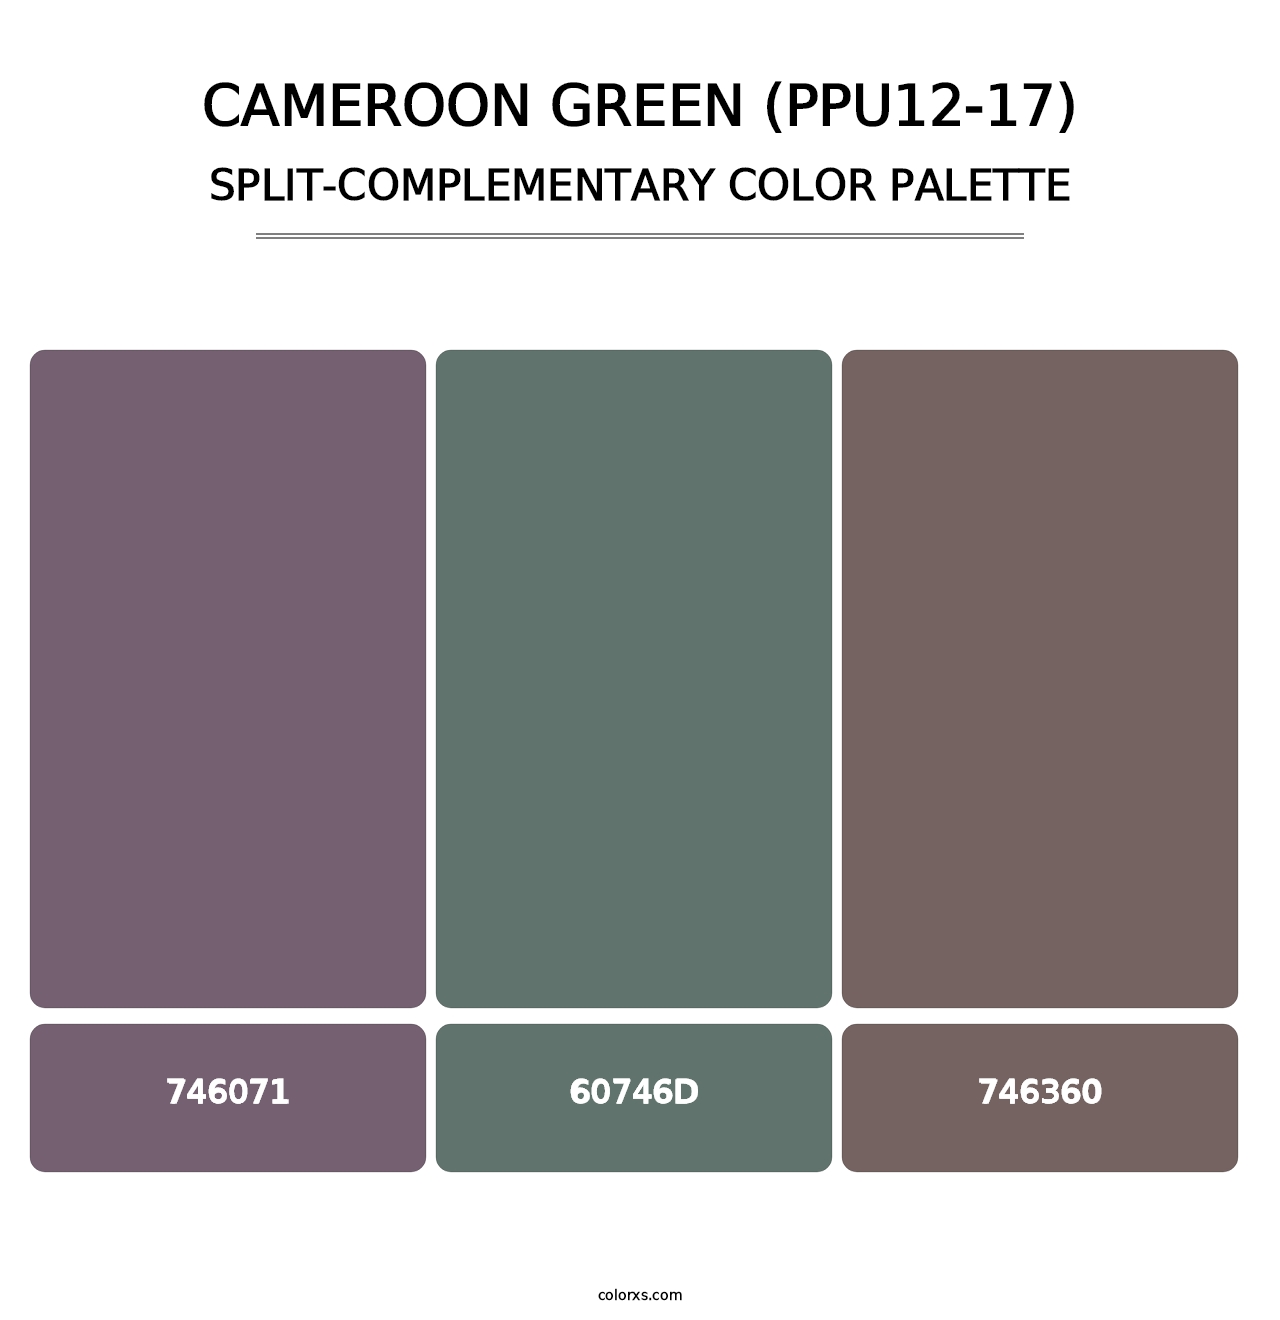 Cameroon Green (PPU12-17) - Split-Complementary Color Palette